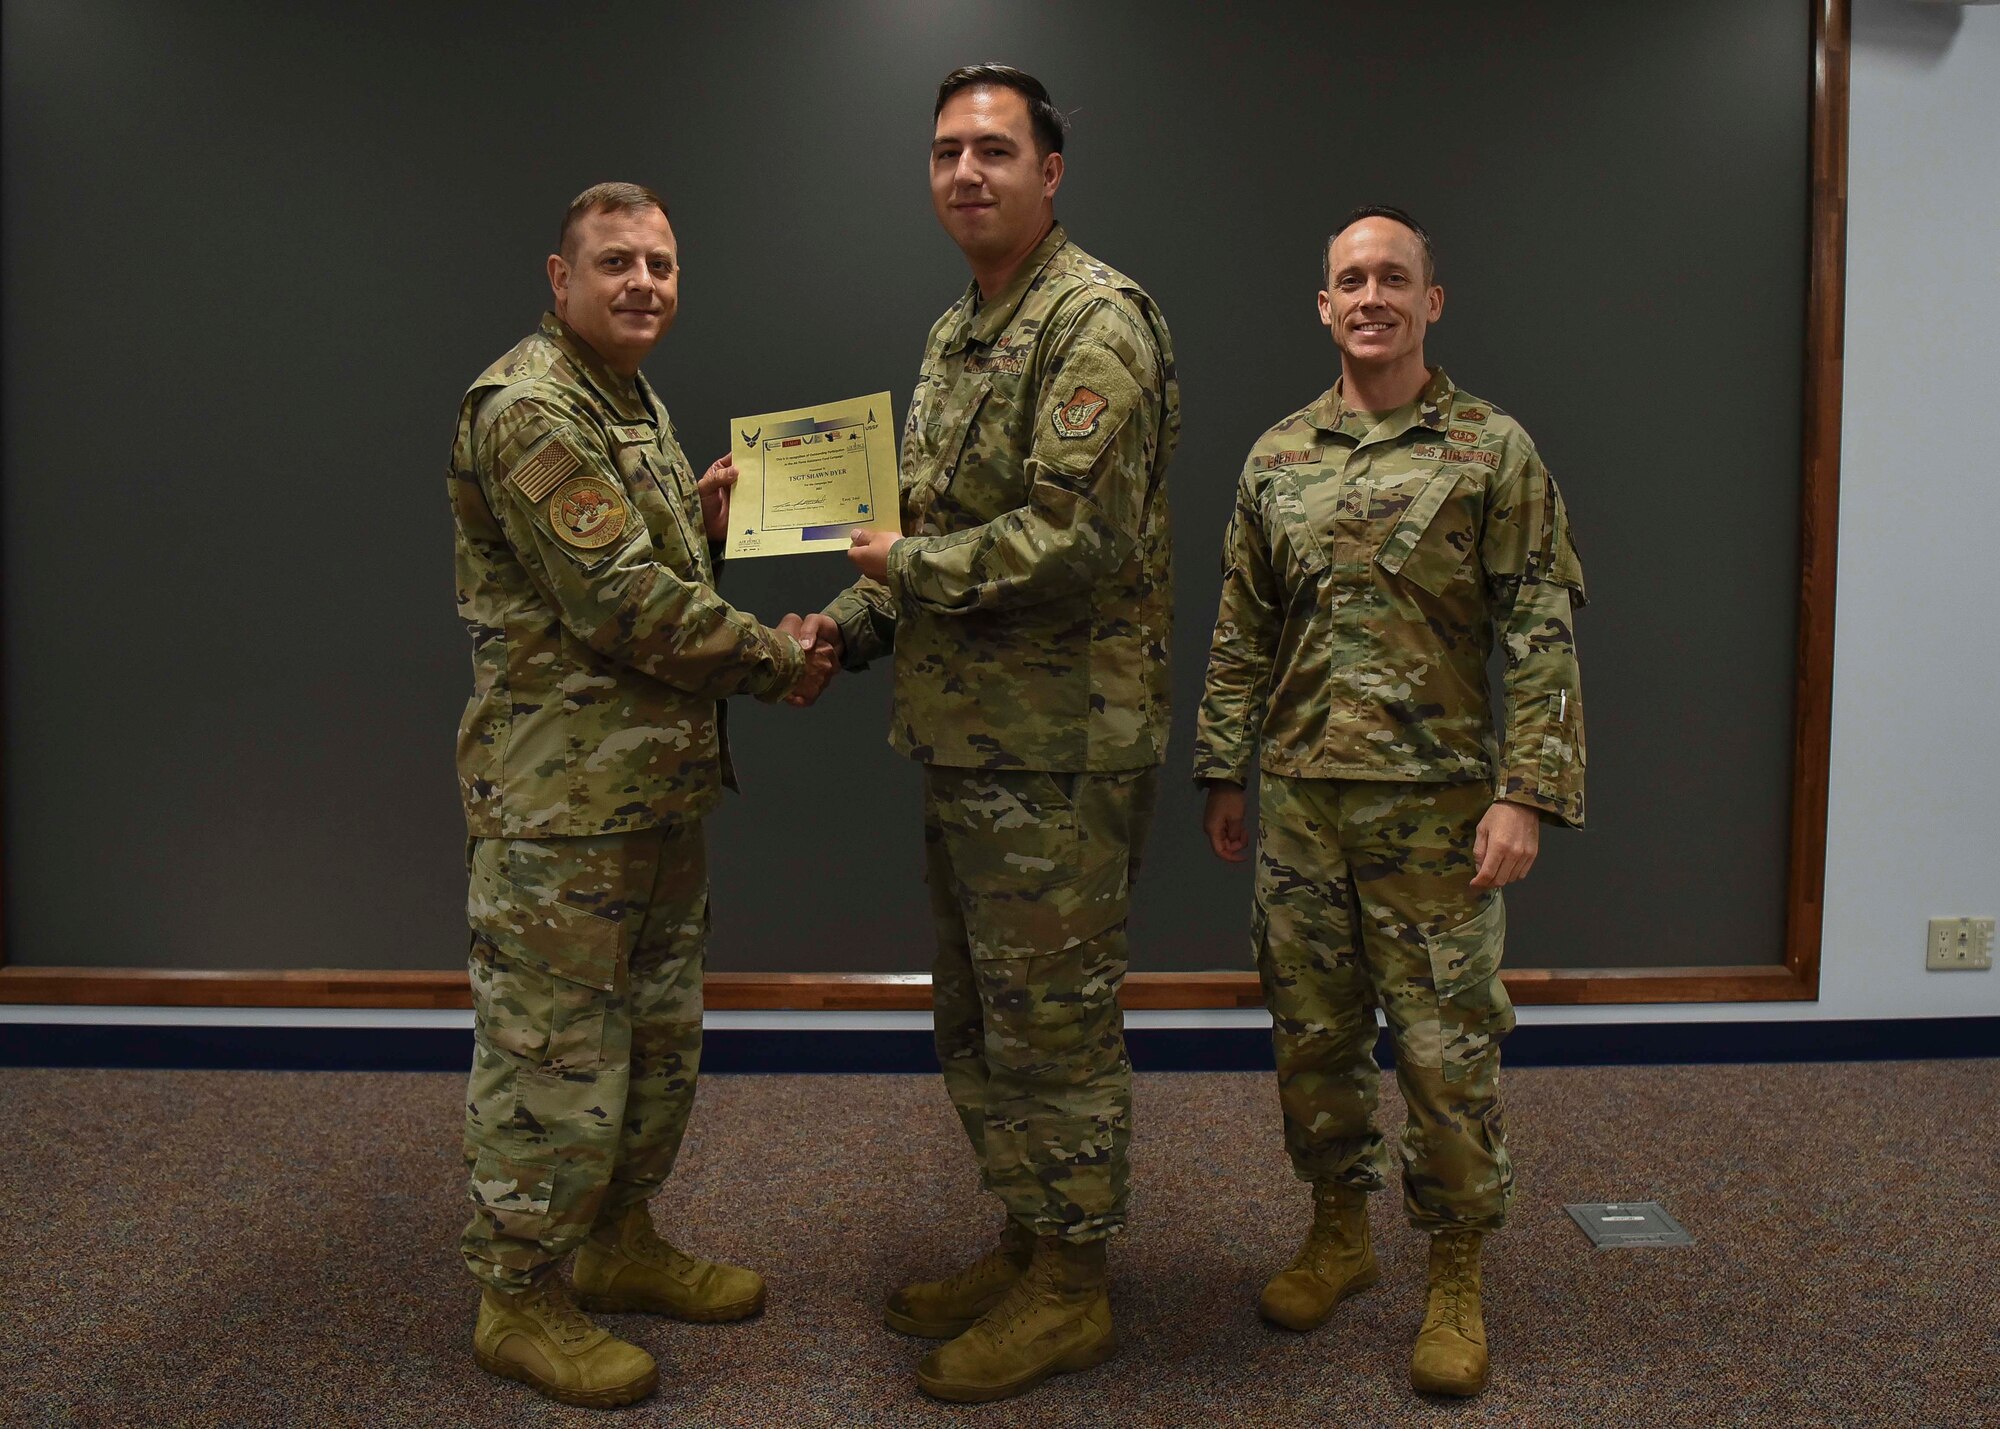 Three military members pose for a picture while the left one awards the center member.